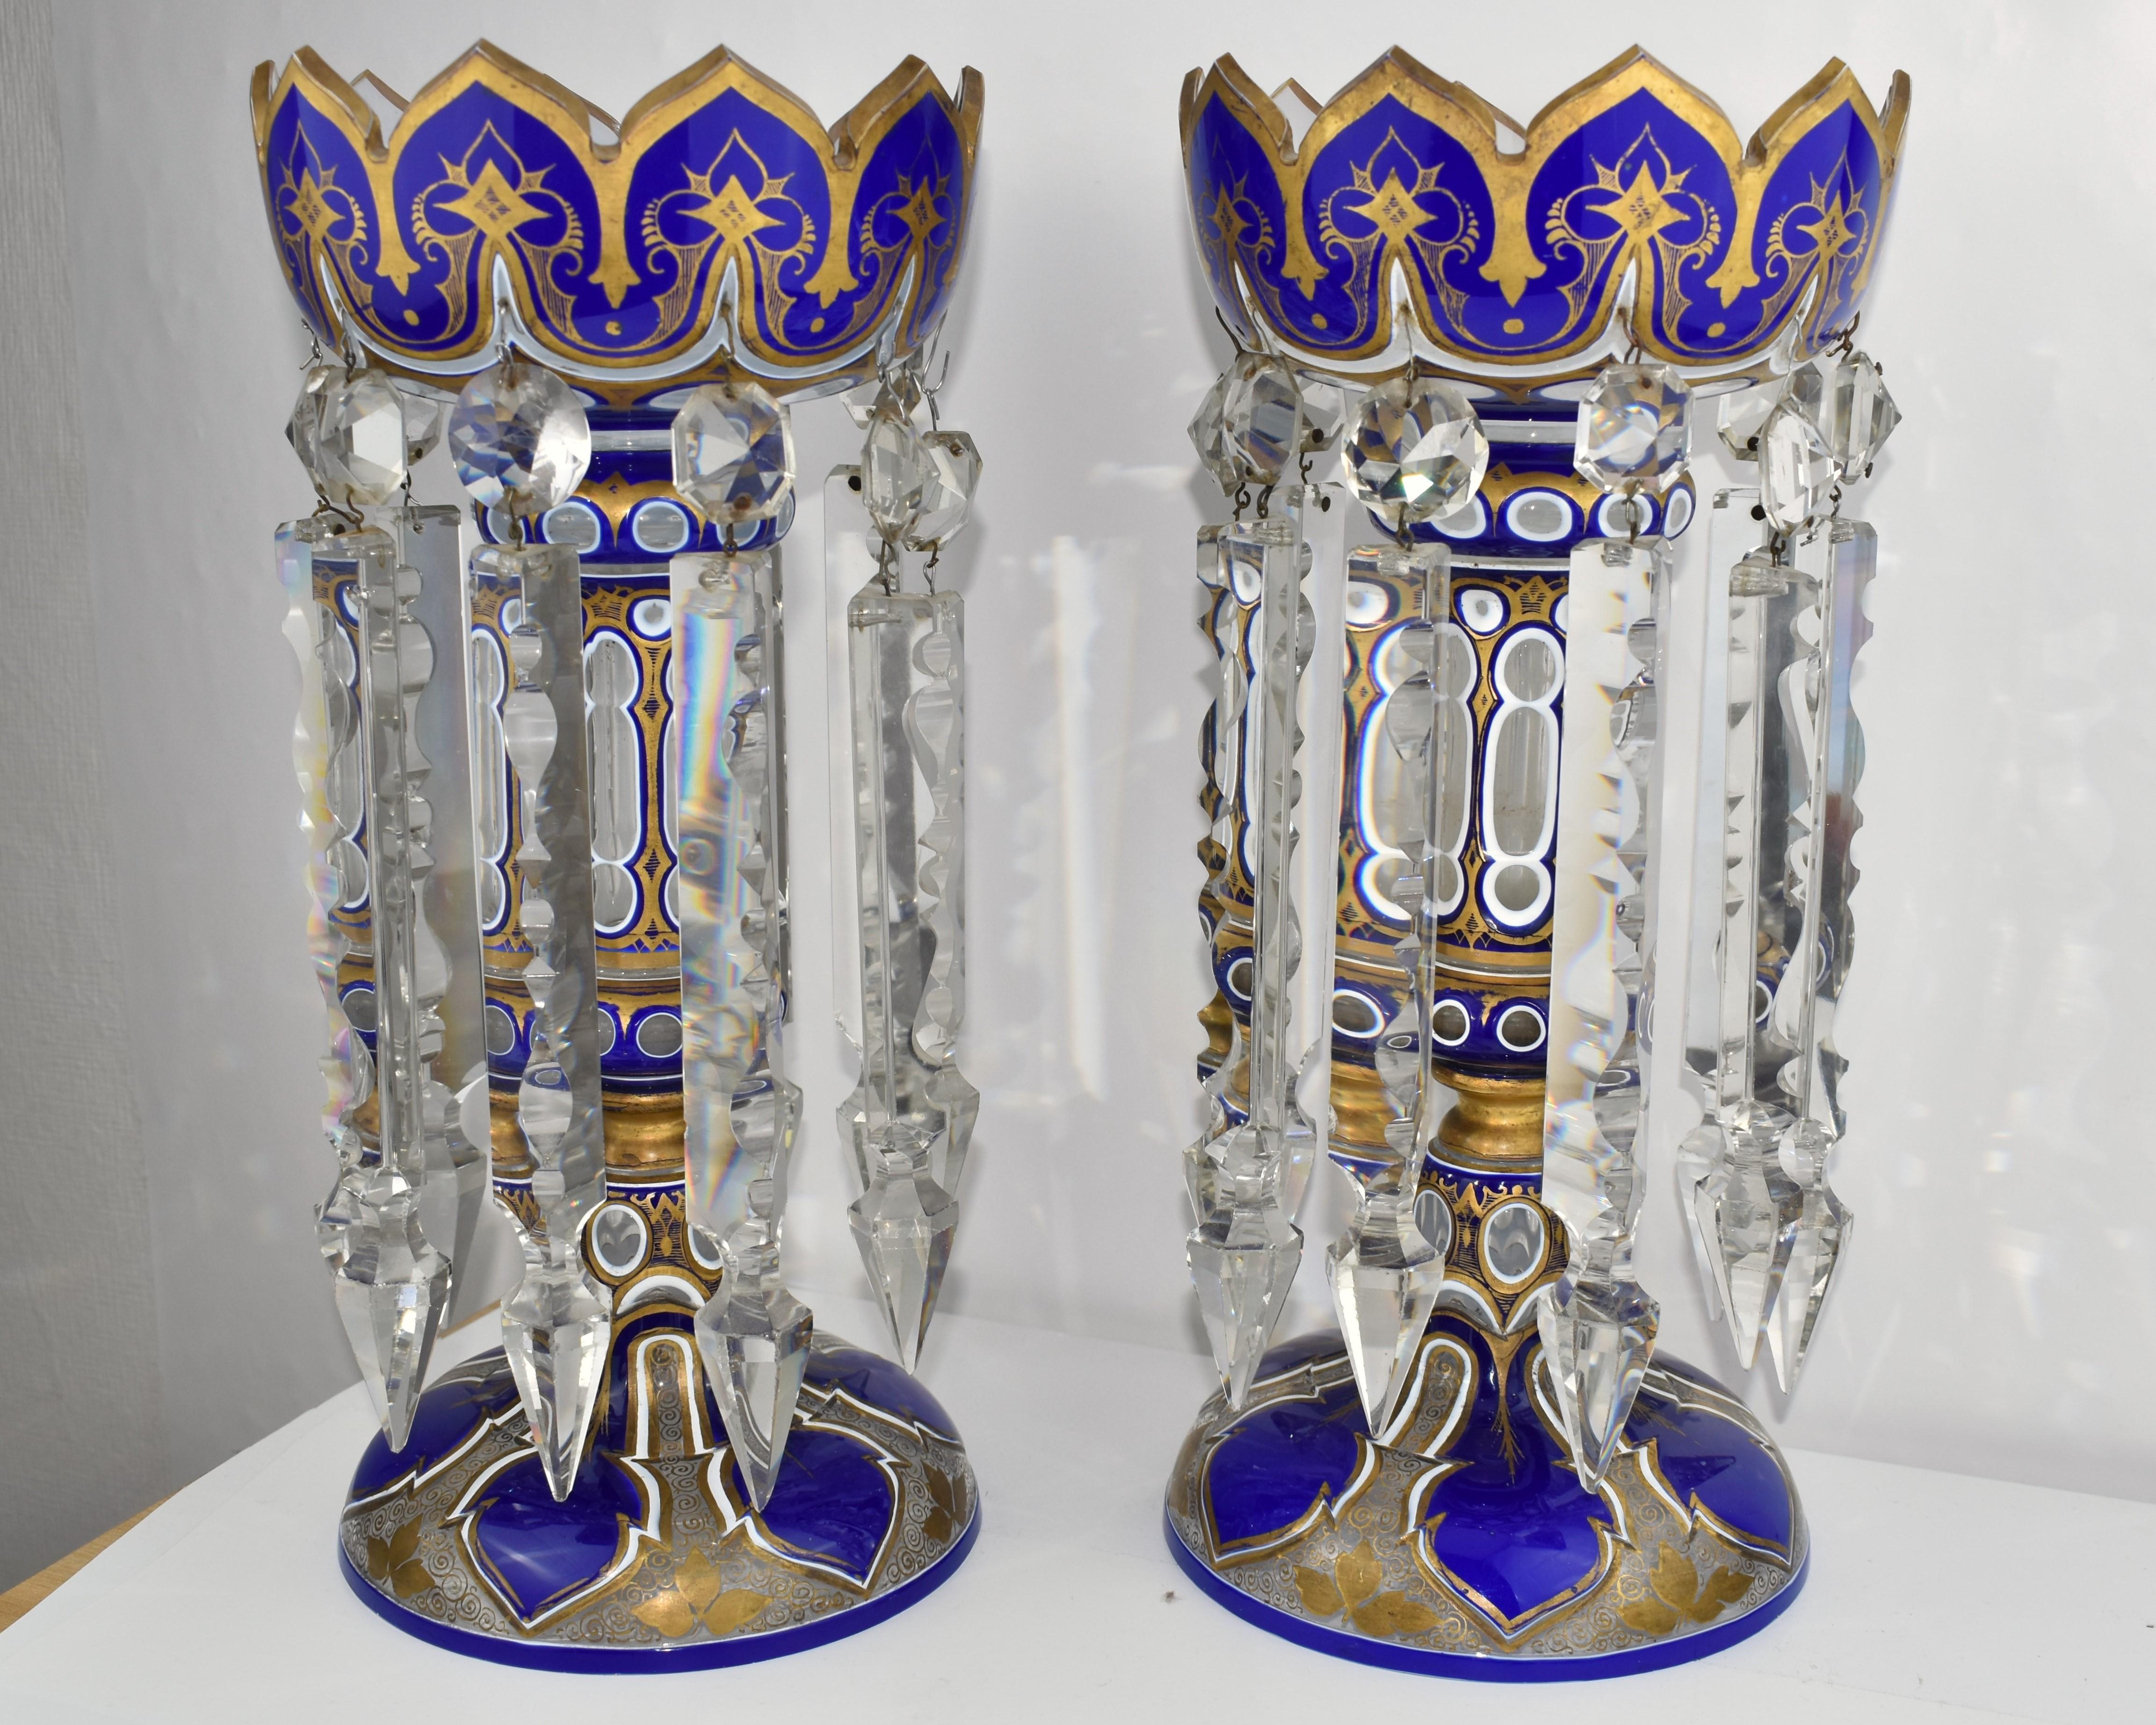 Pair of Blue Glass Lusters in Antique Double Overlay (3 Layers) Cut Glass

Top Quality and Impressive Size 

Glass richly cut in various shapes and decorated all around with gold enamel

Each lustre with multiple hanging hand-carved cut crystal